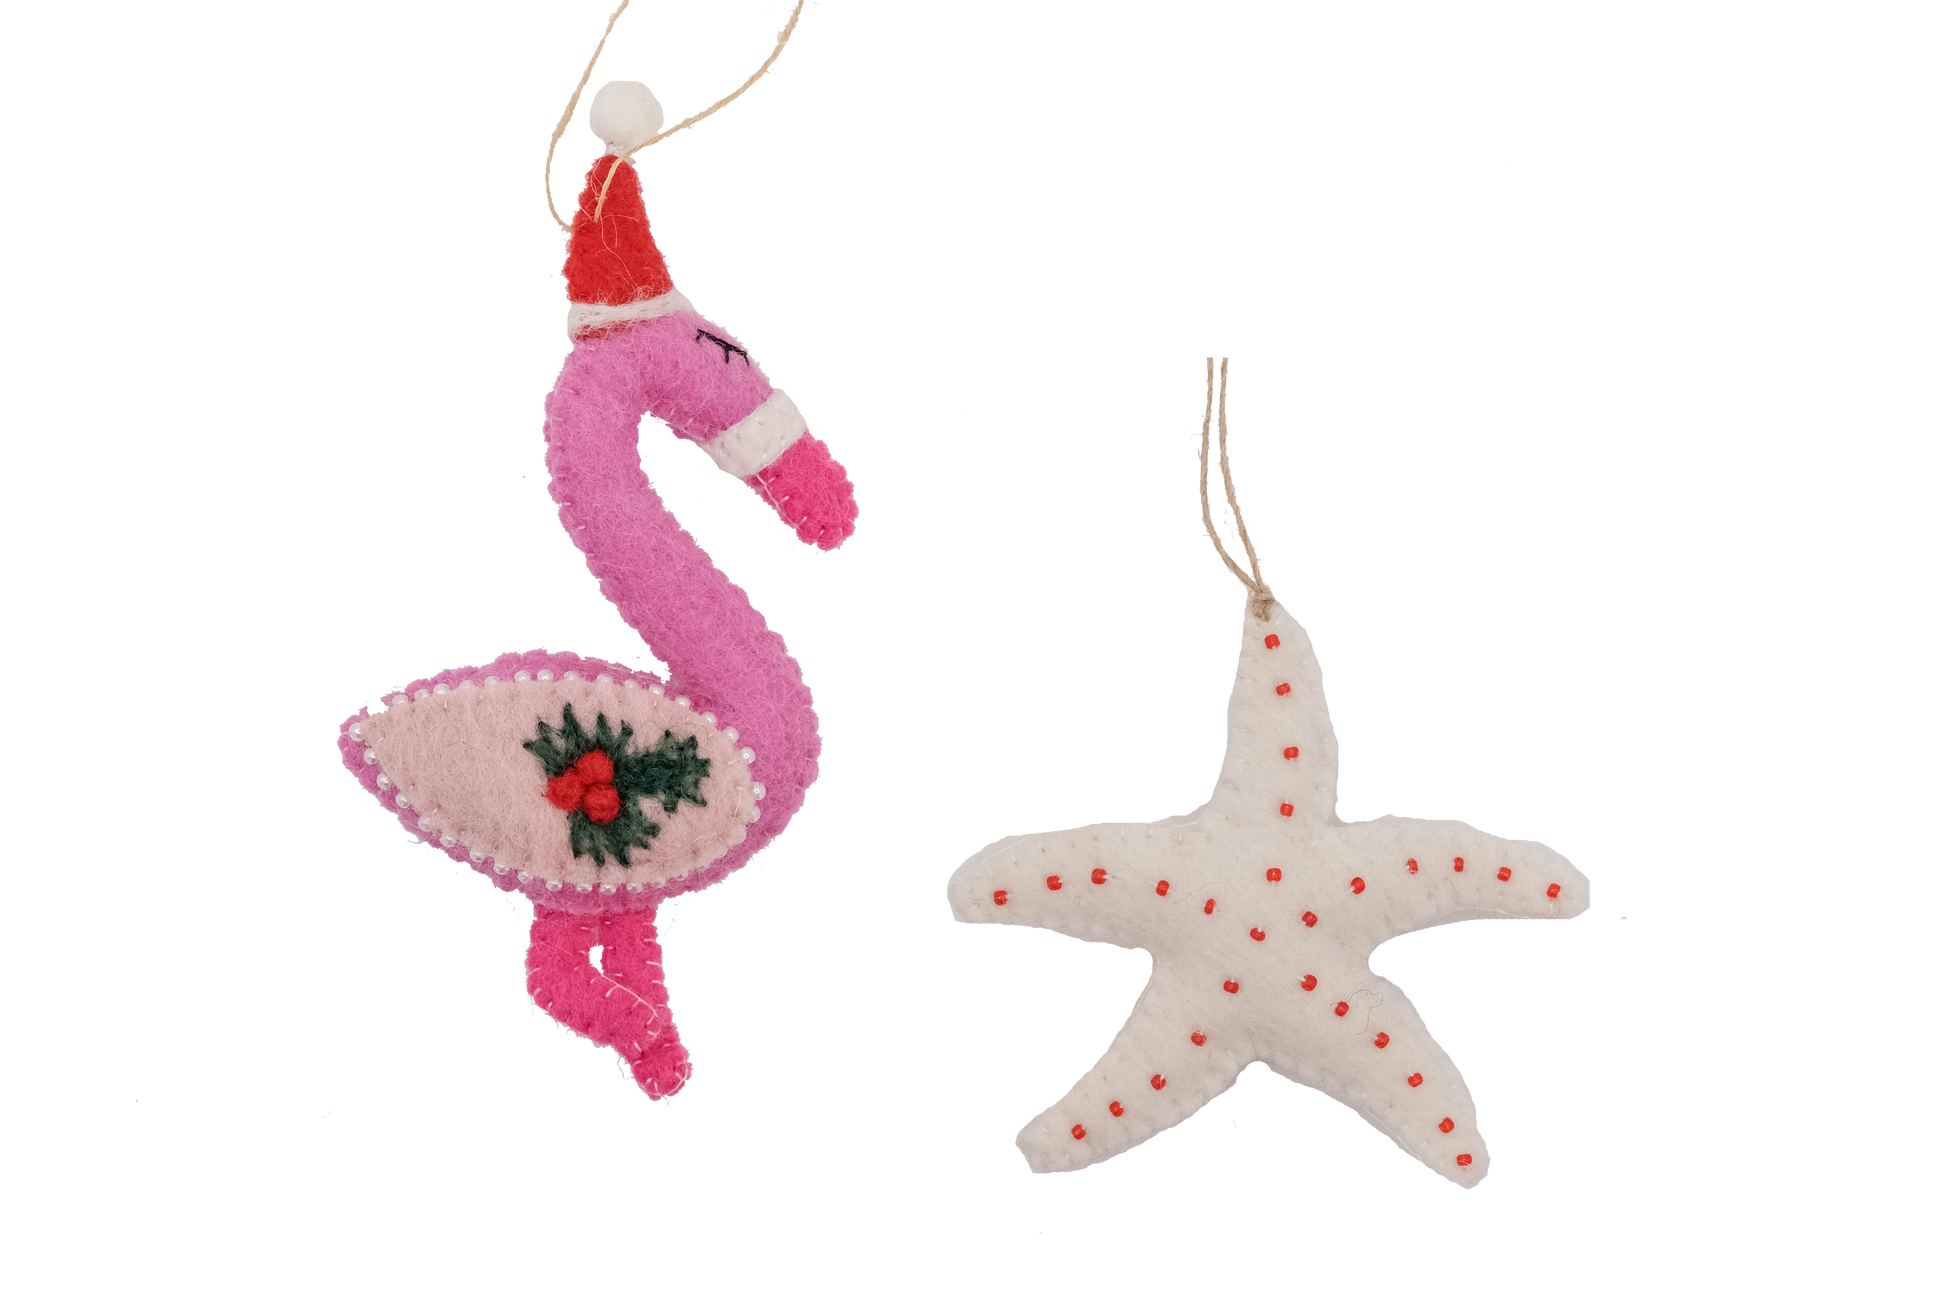 This Global Groove Life, handmade, ethical, fair trade, eco-friendly, sustainable, pink, white and red, felt Flamingo with Starfish ornament set was created by artisans in Kathmandu Nepal and will be a beautiful addition to your Christmas tree this holiday season.